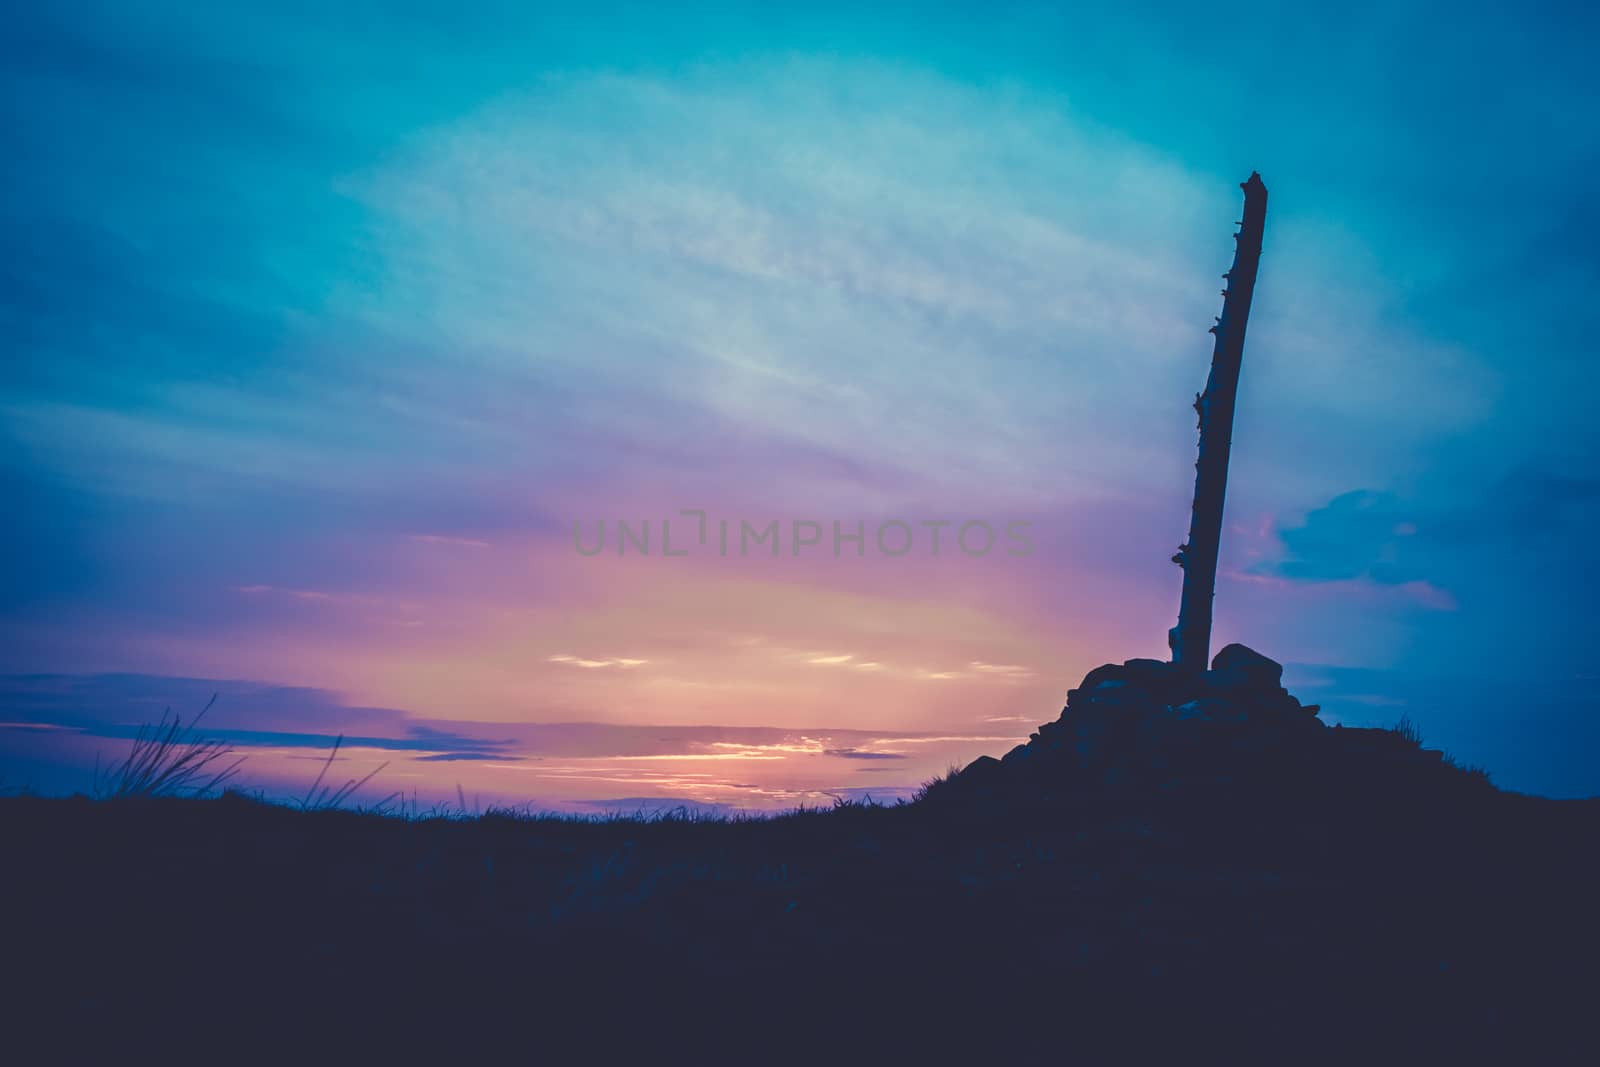 Beautiful Cairn (Pile of Stones Marking a Mountain Top) At Sunset In Scotland With Copy Space